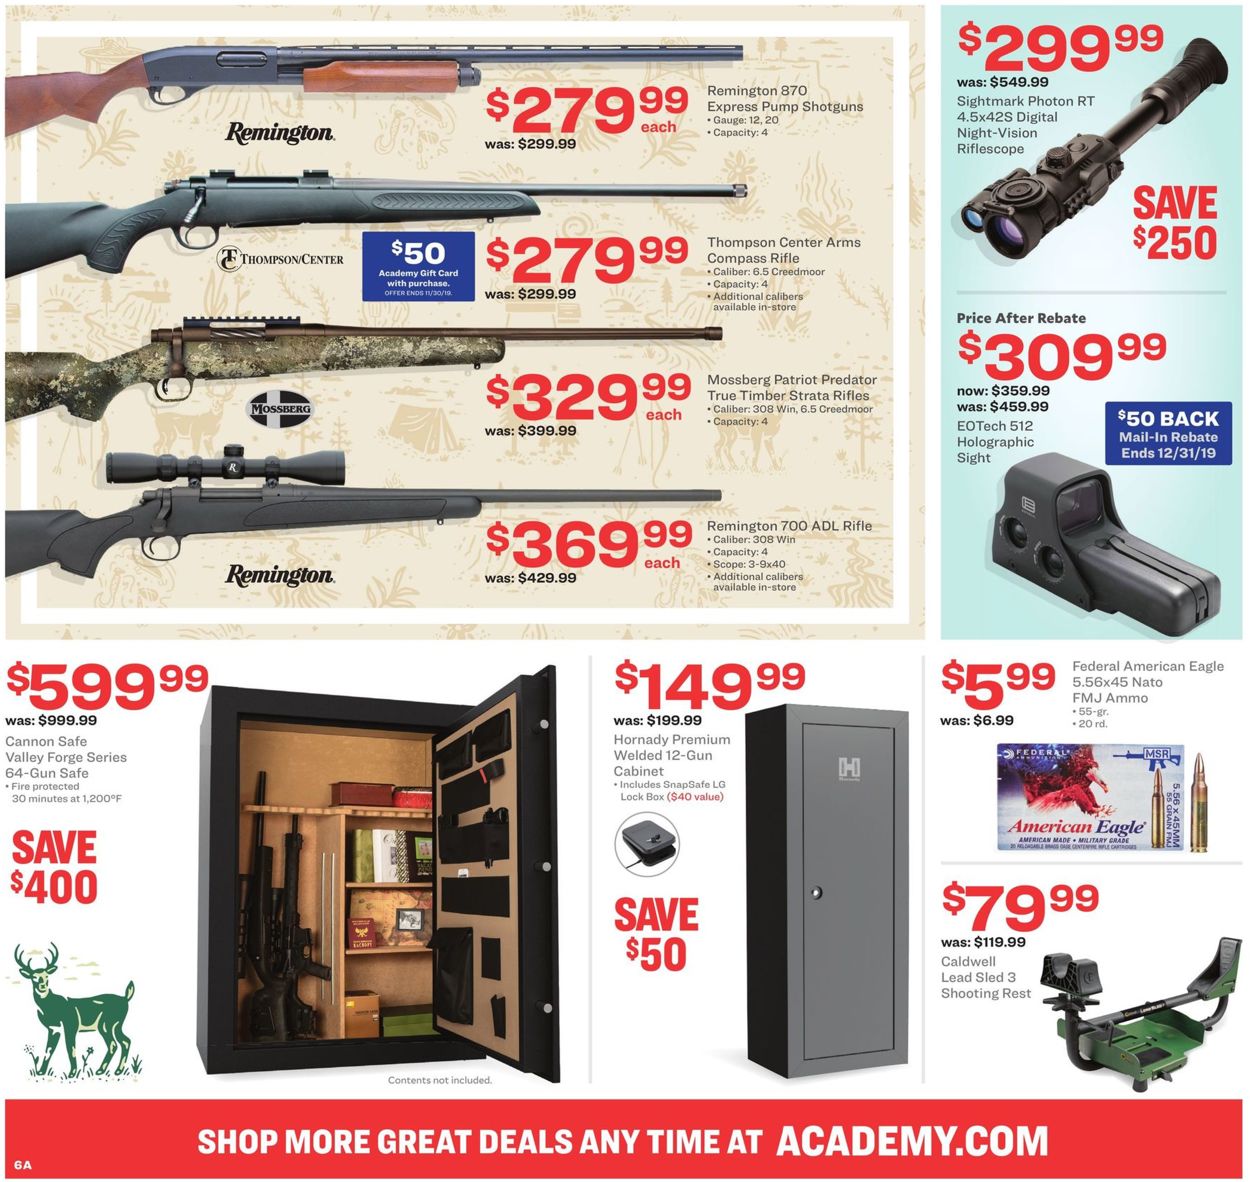 Academy Sports - Early Black Friday 2019 Current Weekly Ad 1124 - 12012019 7 - Frequent-adscom